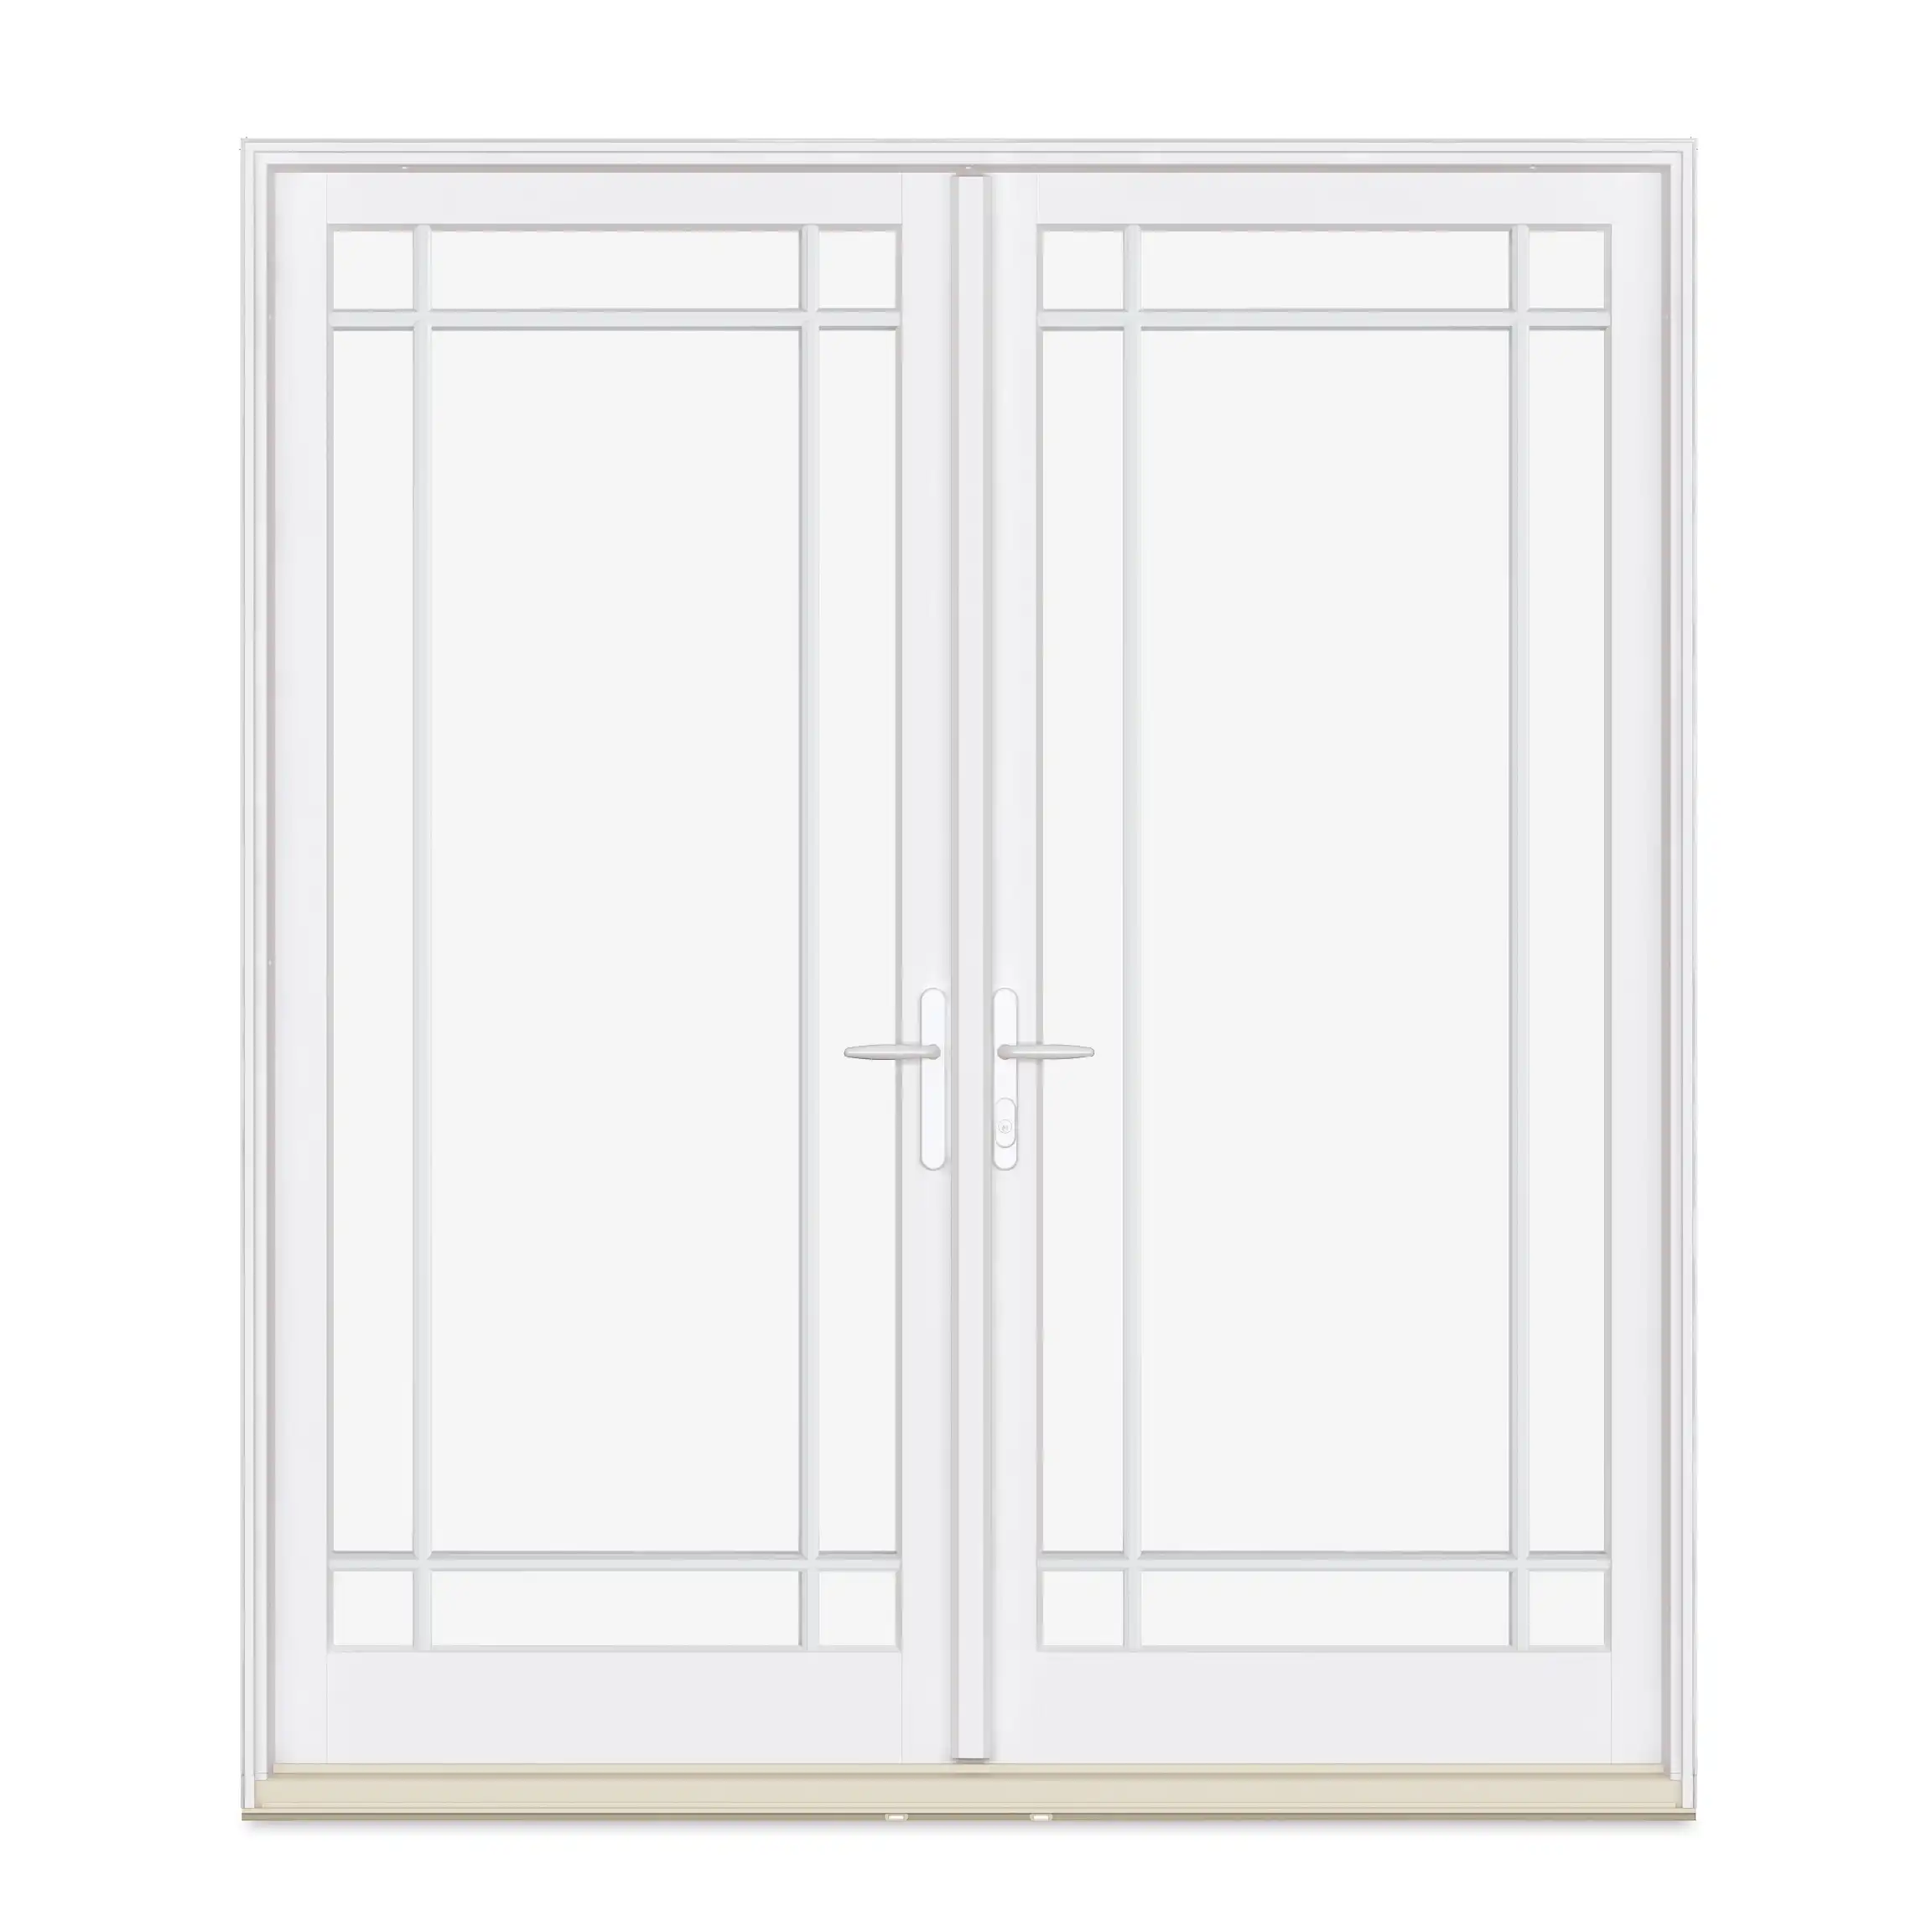 A white Marvin Replacement Inswing French door with Prairie style divided lites and a Northfield style door handle.